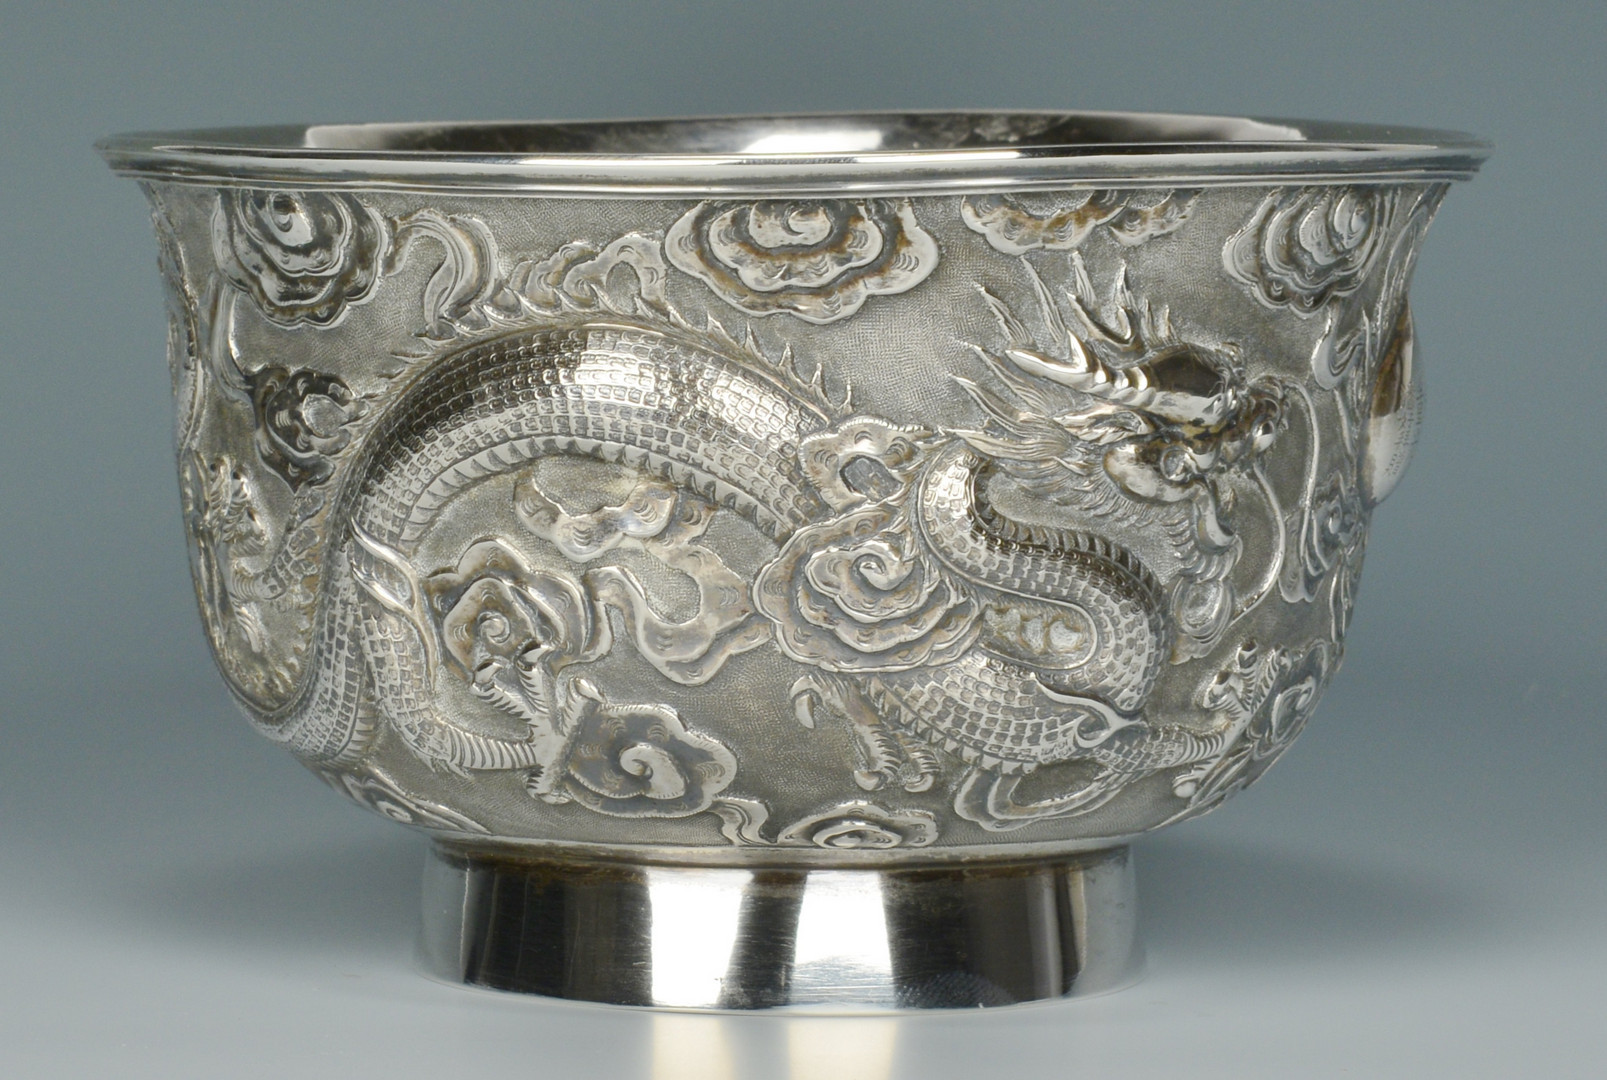 Lot 8: Chinese Export Silver Bowl w/ Dragon Design